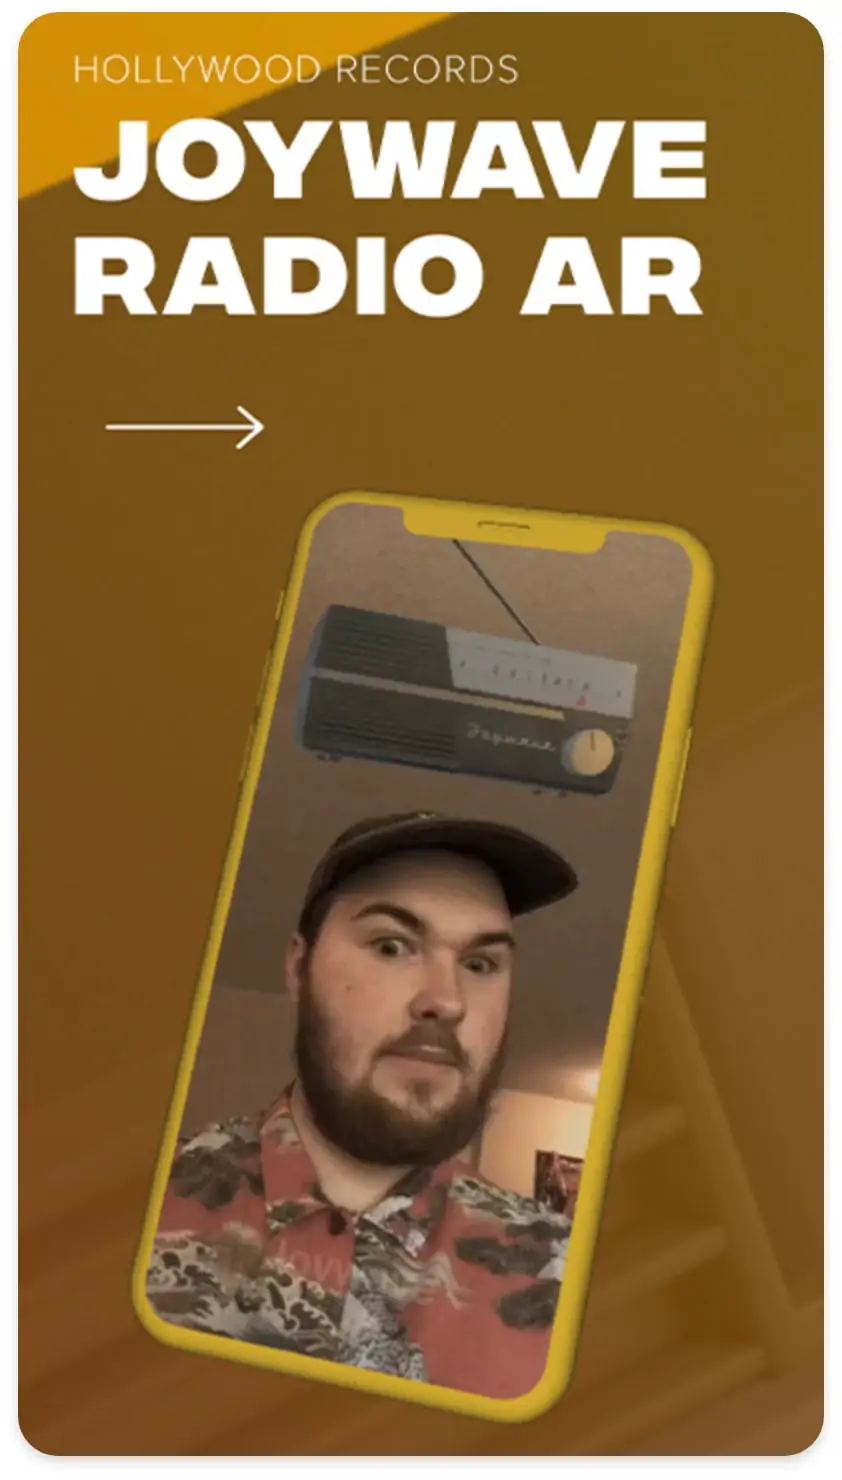 shot of a mobile view of osxr website showing a mobile phone with a man on it. text reads "hollywood records. joywave radio ar"